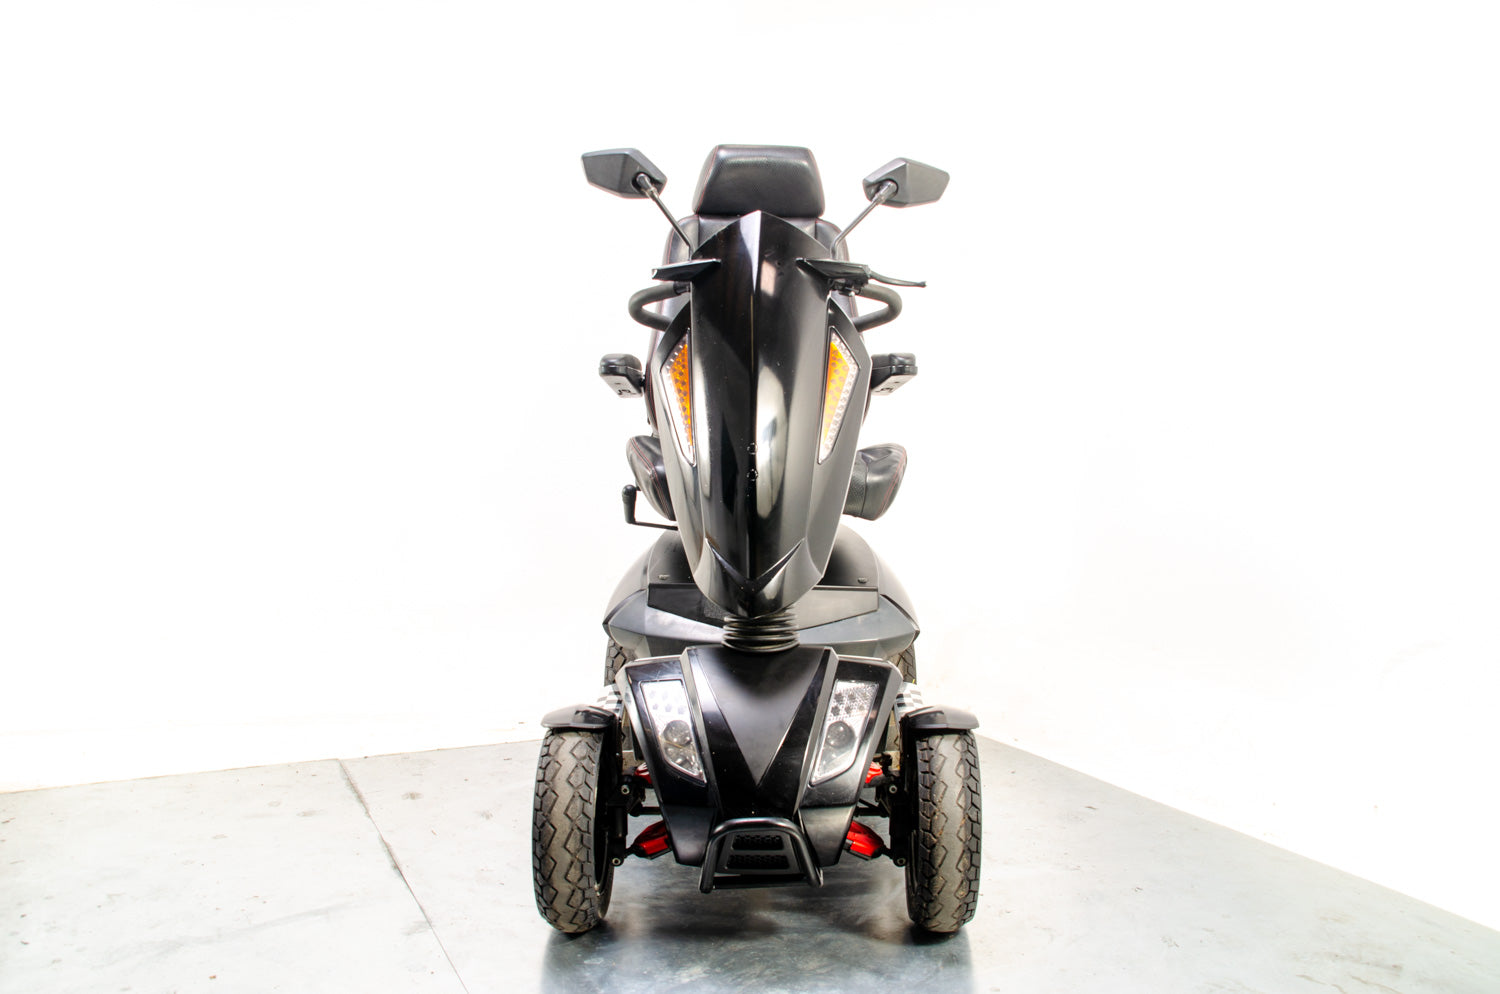 TGA Vita S Sport Used Mobility Scooter 8mph All-Terrain Large Road Legal Bucket Seat 13706